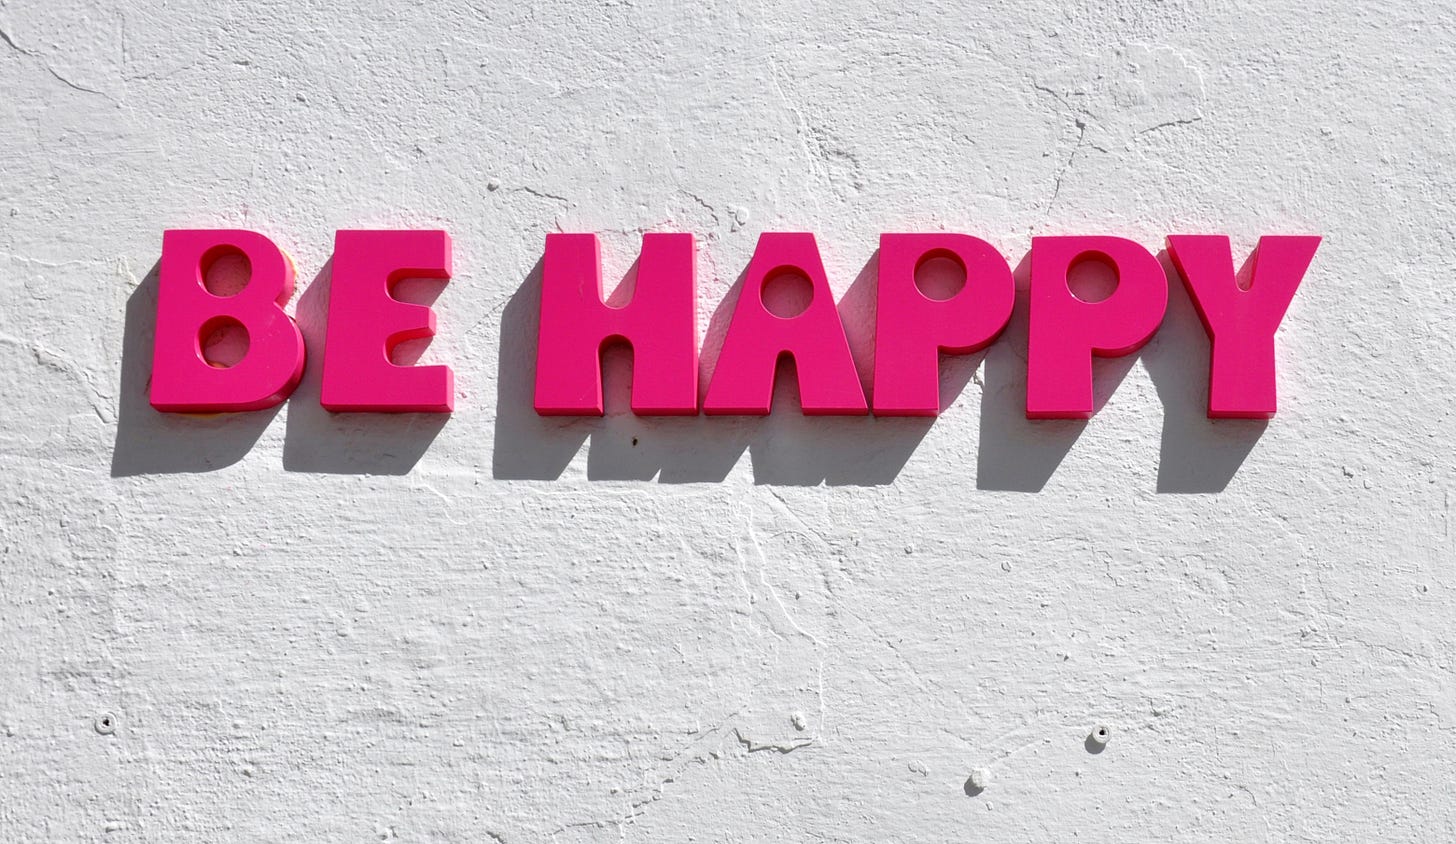 the words "Be happy" on a wall in pink letter